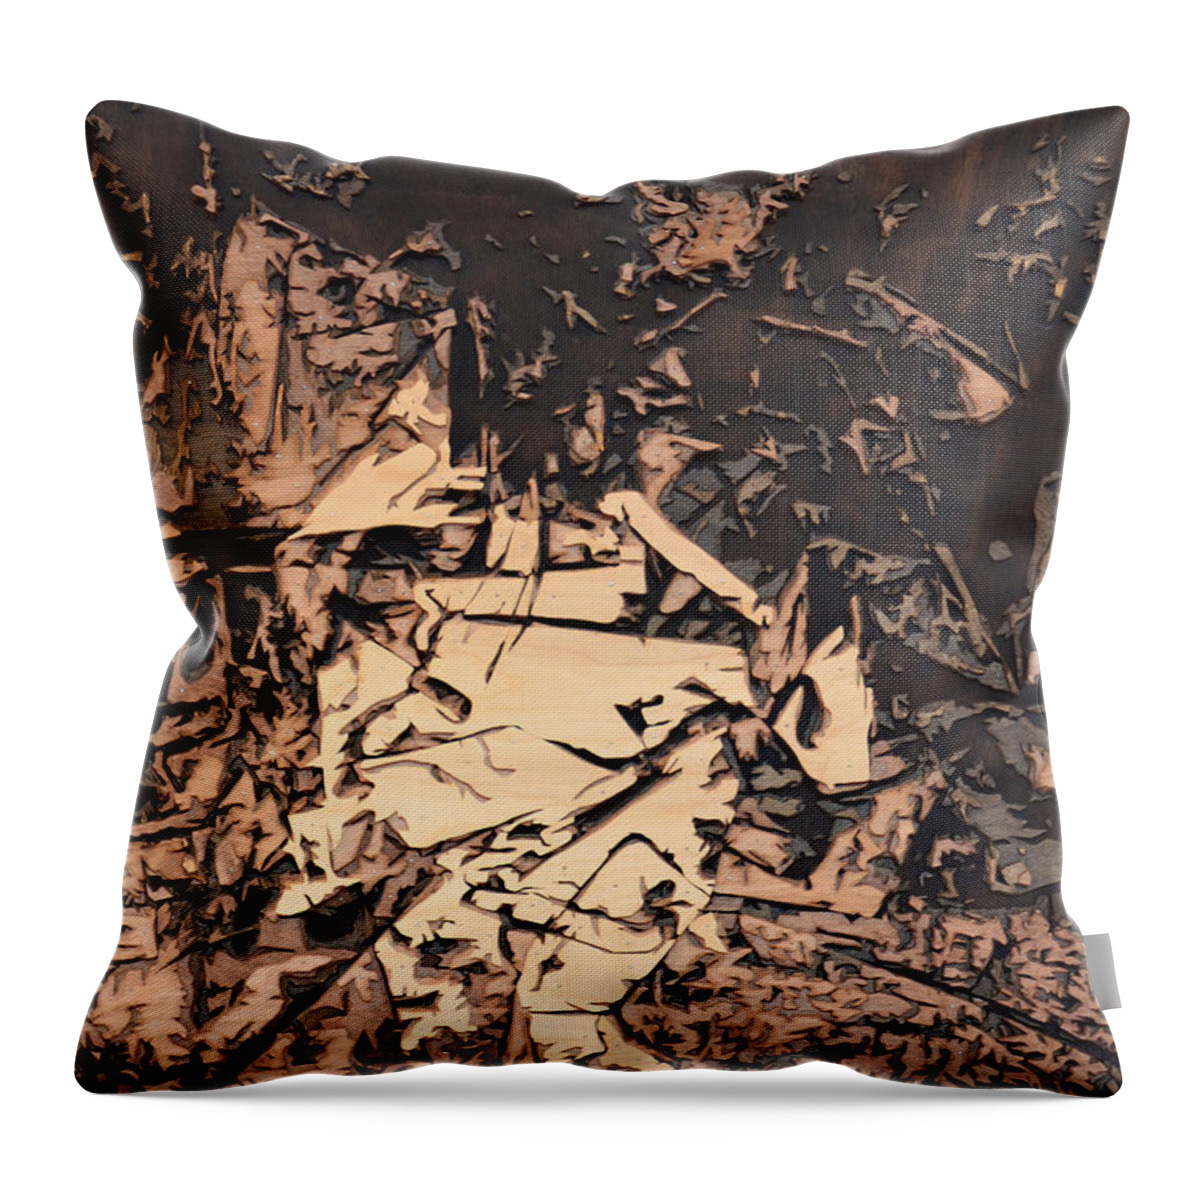 Wood Art Throw Pillow featuring the painting The Human Condition by Bobby Zeik